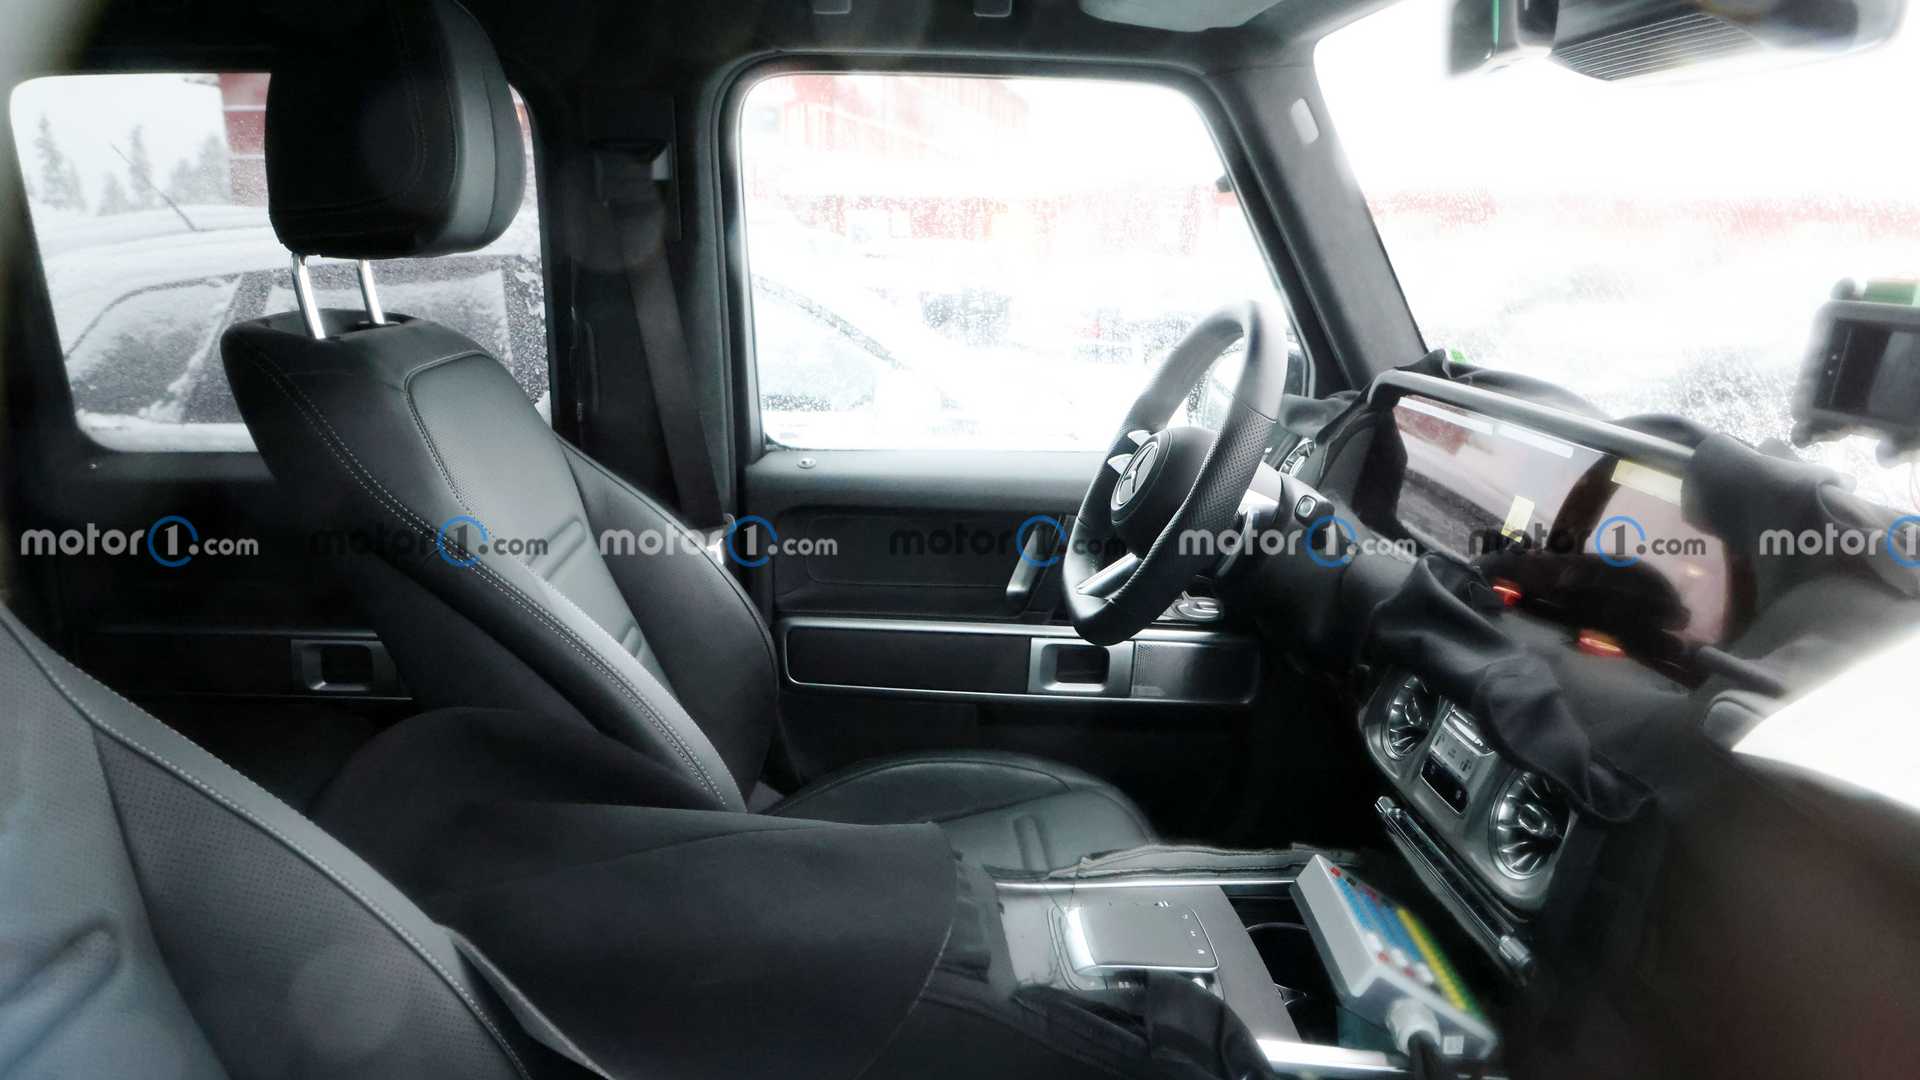 Spy images of the interior of the Mercedes-Benz EQC